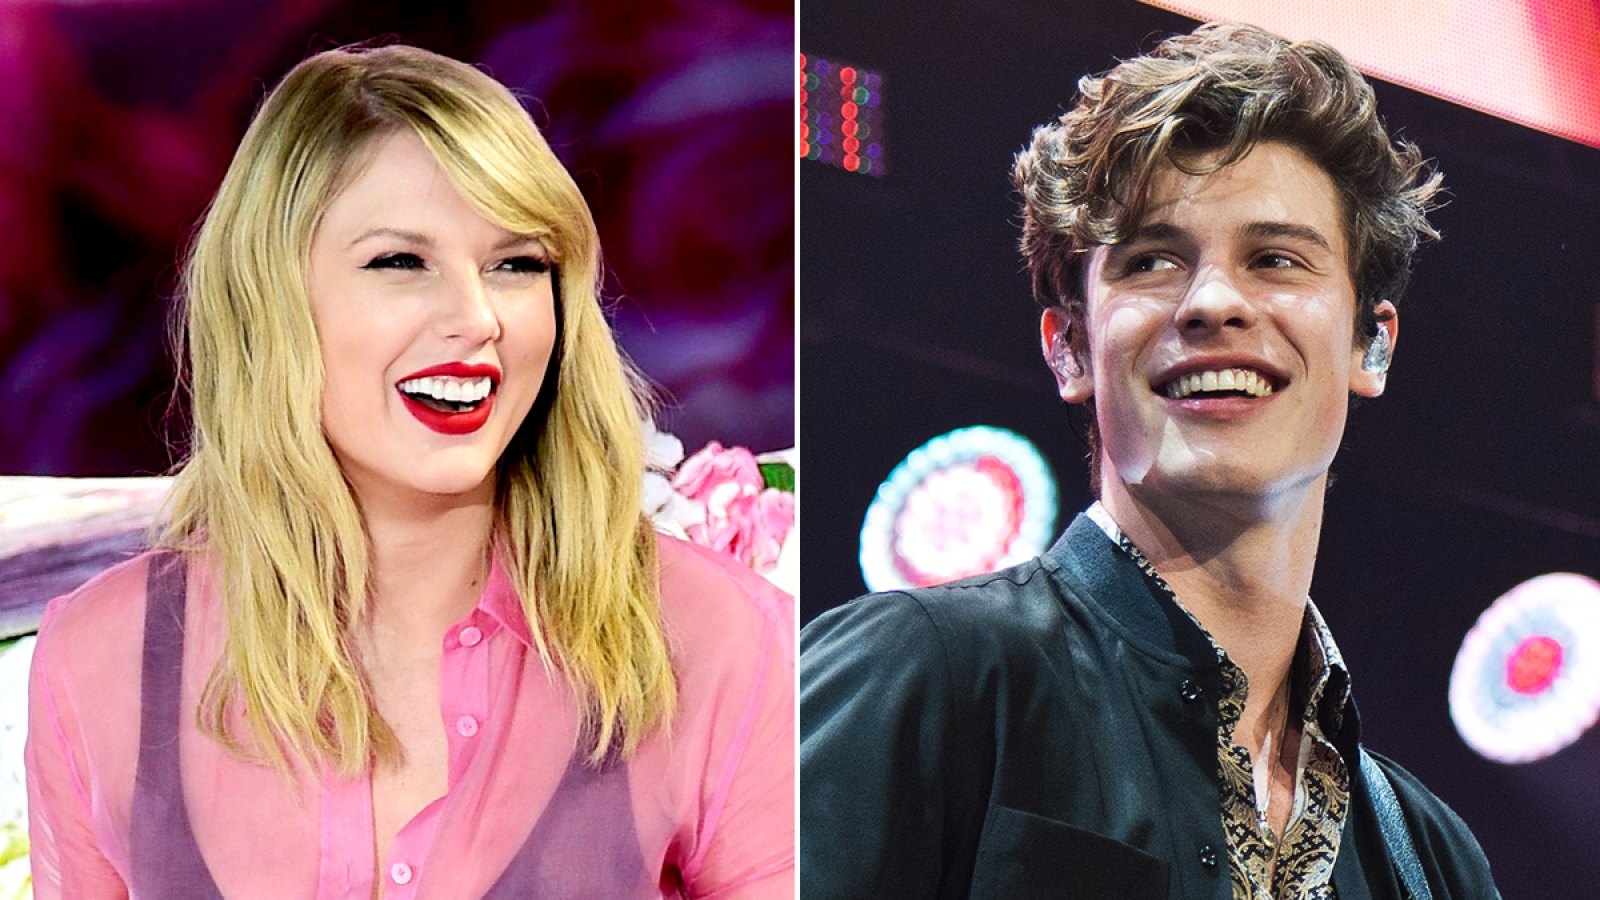 Taylor-Swift-Lover-Remix-Featuring-Shawn-Mendes